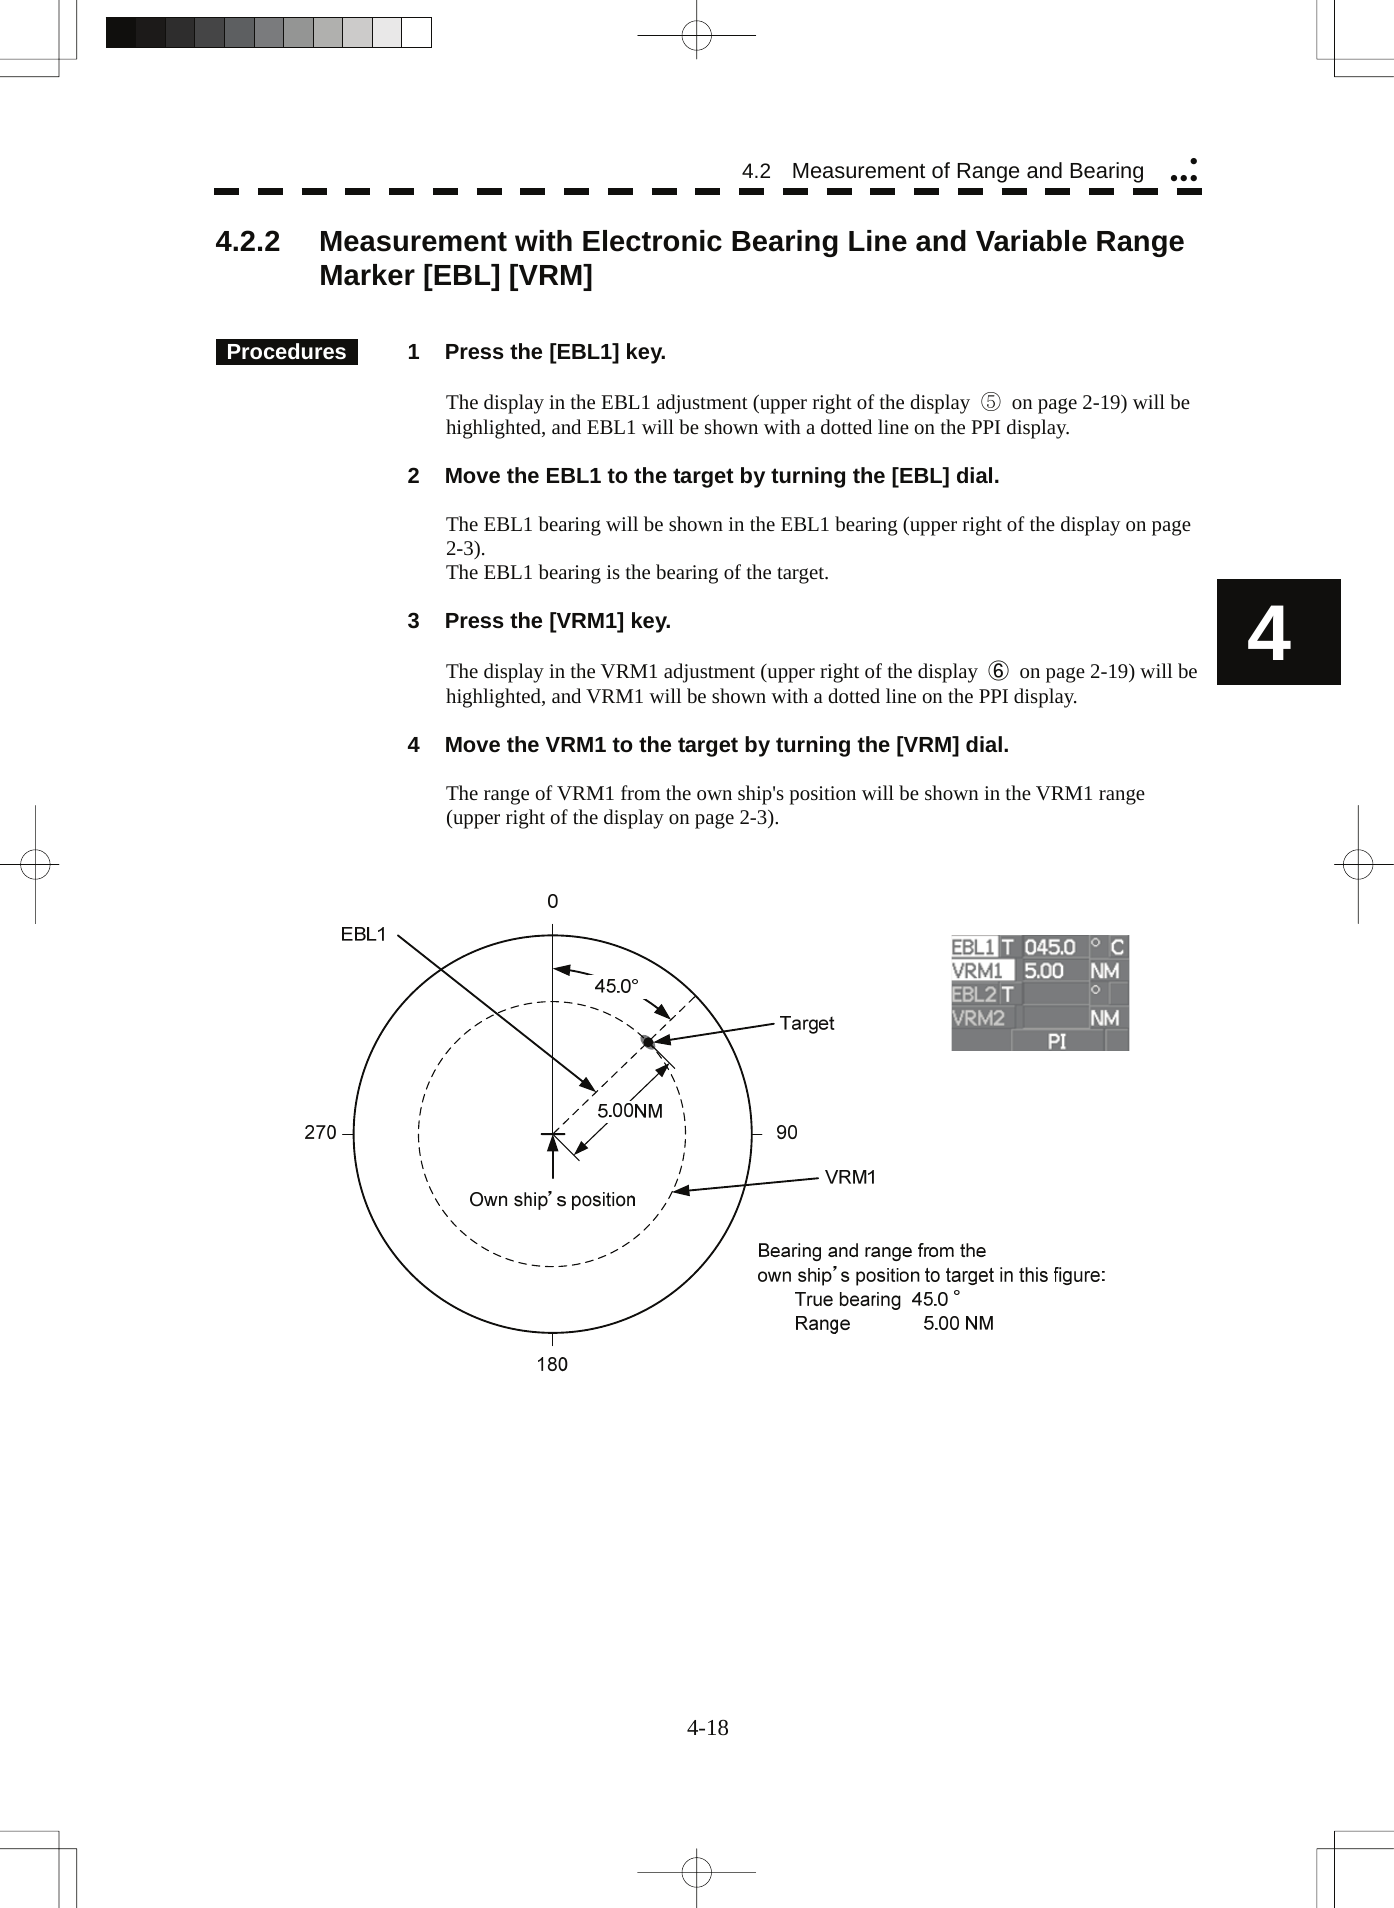   4 4.2  Measurement of Range and Bearing yyyy4.2.2  Measurement with Electronic Bearing Line and Variable Range Marker [EBL] [VRM]      Procedures   1  Press the [EBL1] key.  The display in the EBL1 adjustment (upper right of the display  ⑤  on page 2-19) will be highlighted, and EBL1 will be shown with a dotted line on the PPI display.    2  Move the EBL1 to the target by turning the [EBL] dial.  The EBL1 bearing will be shown in the EBL1 bearing (upper right of the display on page 2-3). The EBL1 bearing is the bearing of the target.    3  Press the [VRM1] key.  The display in the VRM1 adjustment (upper right of the display  ⑥  on page 2-19) will be highlighted, and VRM1 will be shown with a dotted line on the PPI display.    4  Move the VRM1 to the target by turning the [VRM] dial.  The range of VRM1 from the own ship&apos;s position will be shown in the VRM1 range (upper right of the display on page 2-3).      4-18 